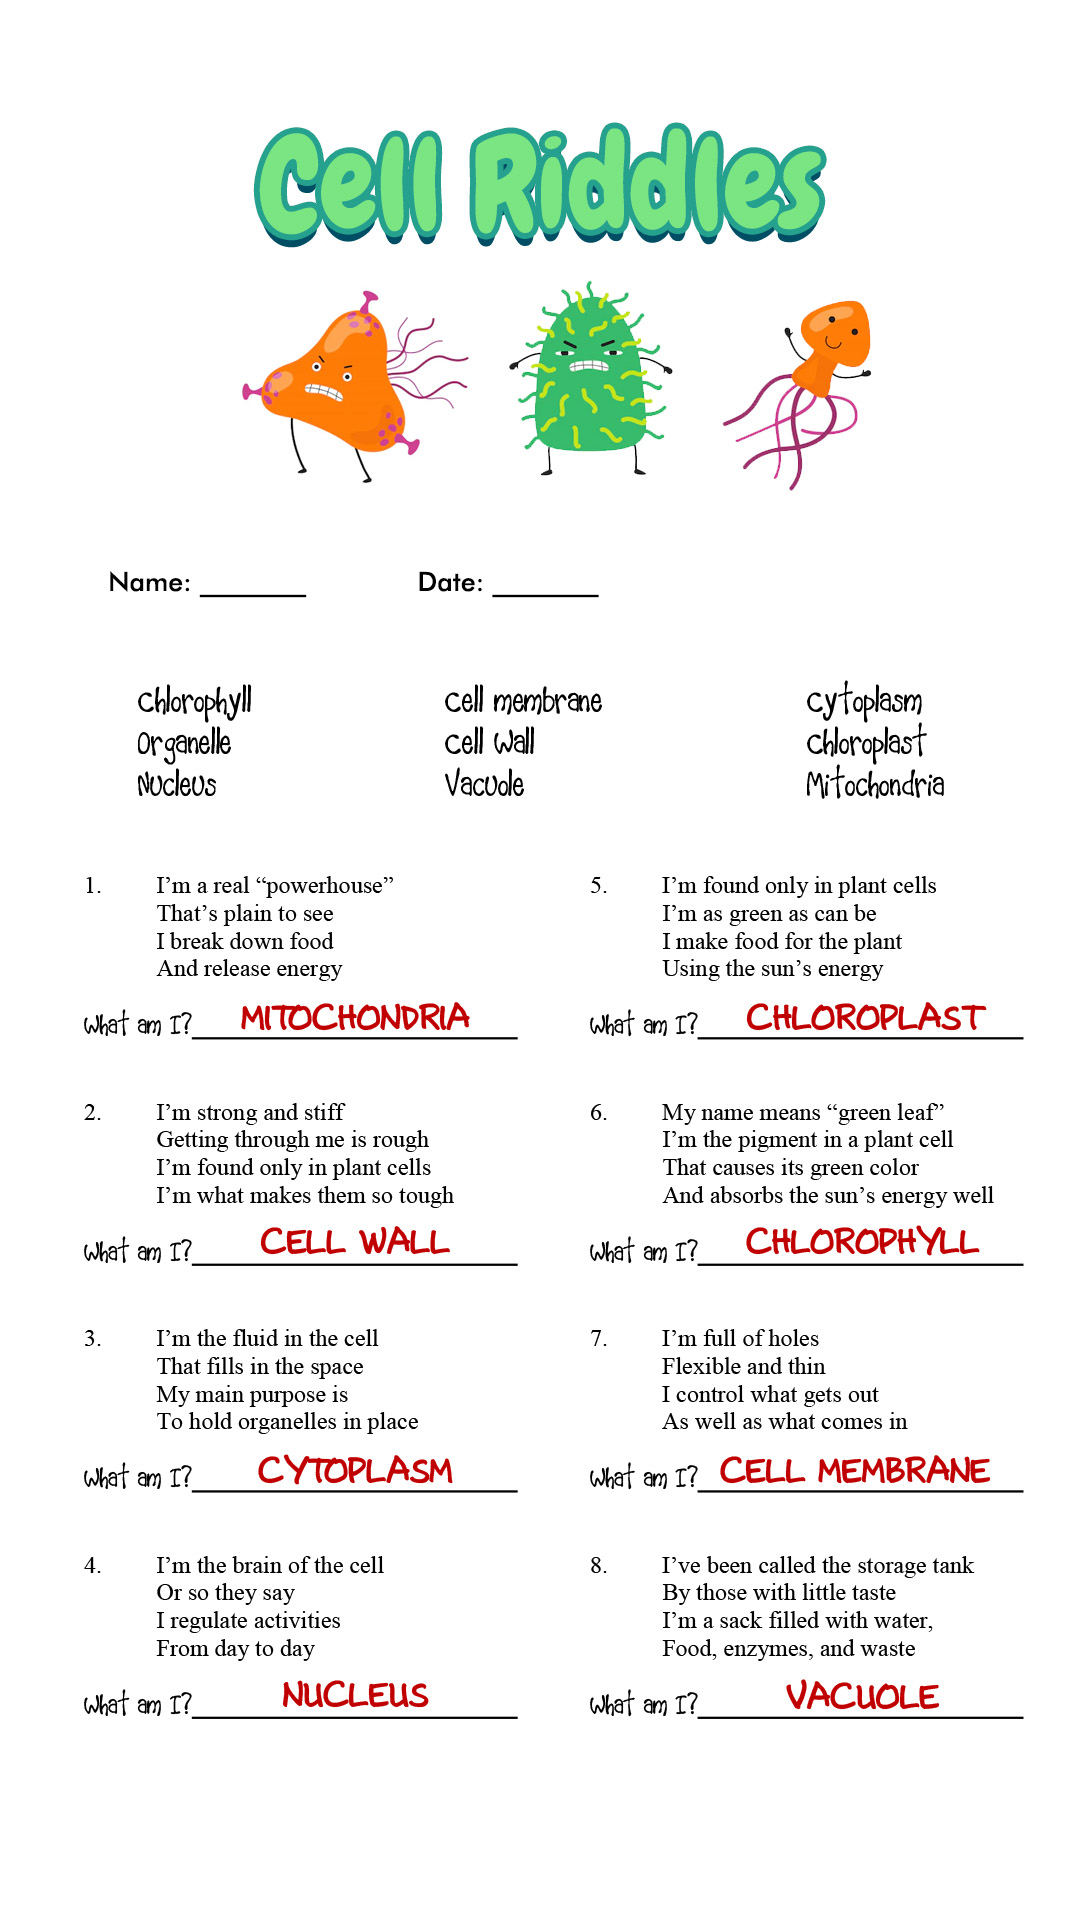 14-best-images-of-cell-organelle-riddles-worksheet-answers-cells-and